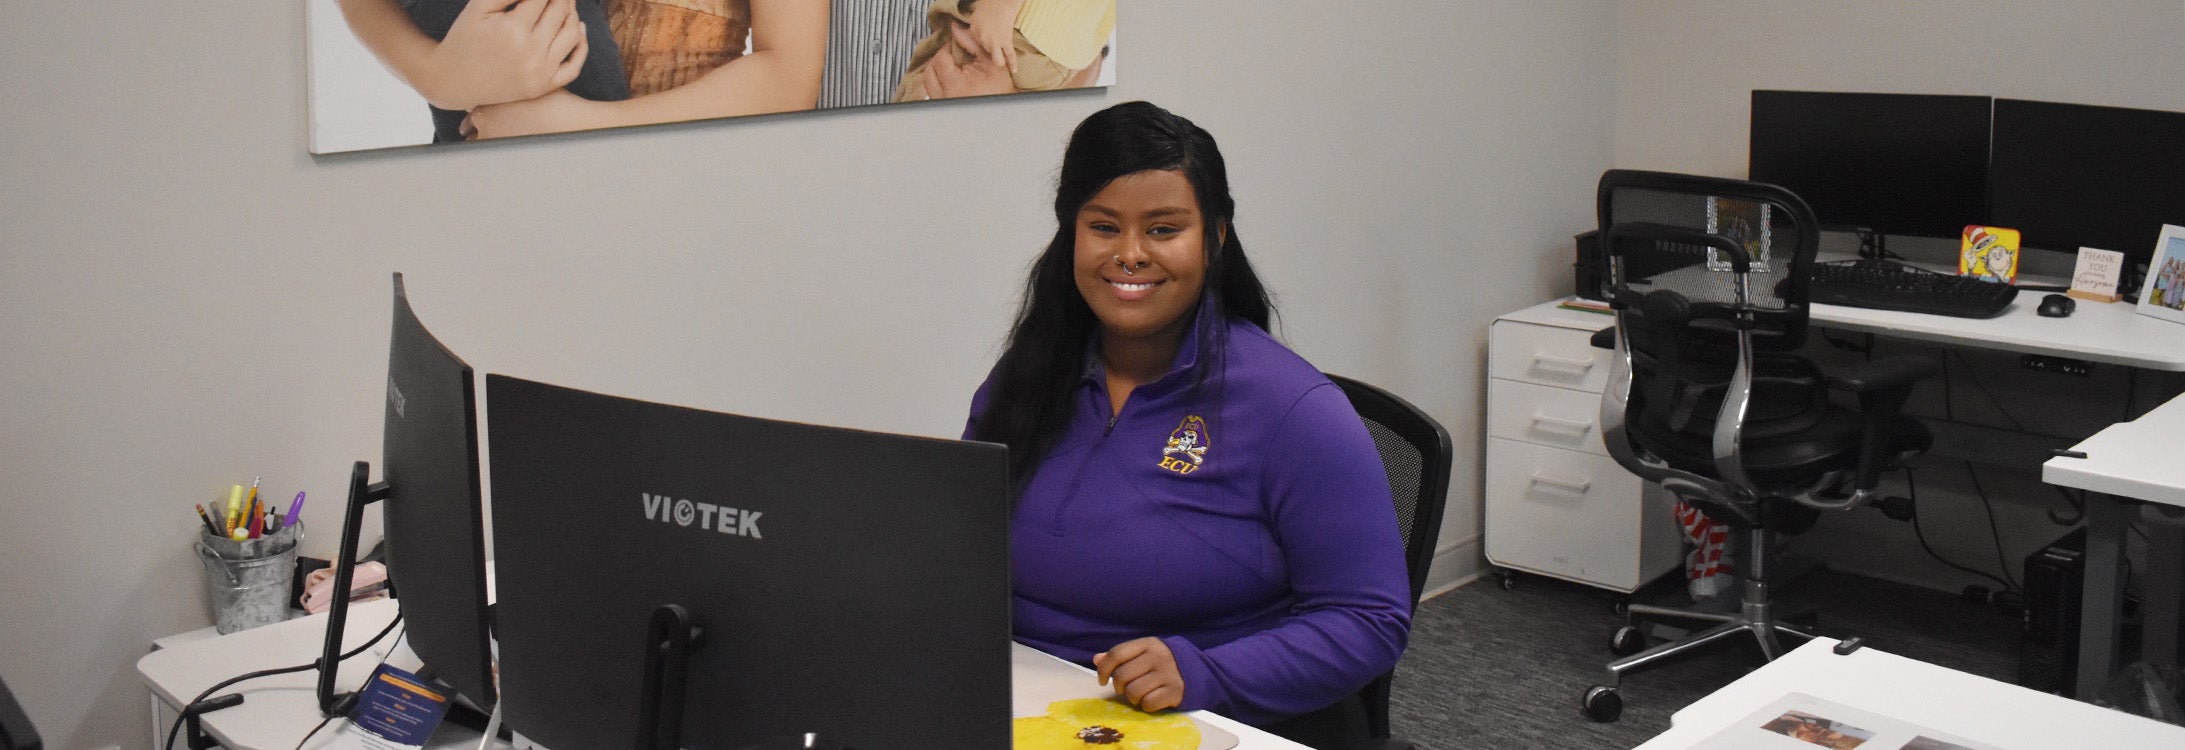 East Carolina University psychology major Jasmine Johnson uses her computer science experience to assist One Place with an important database project that benefits the community.